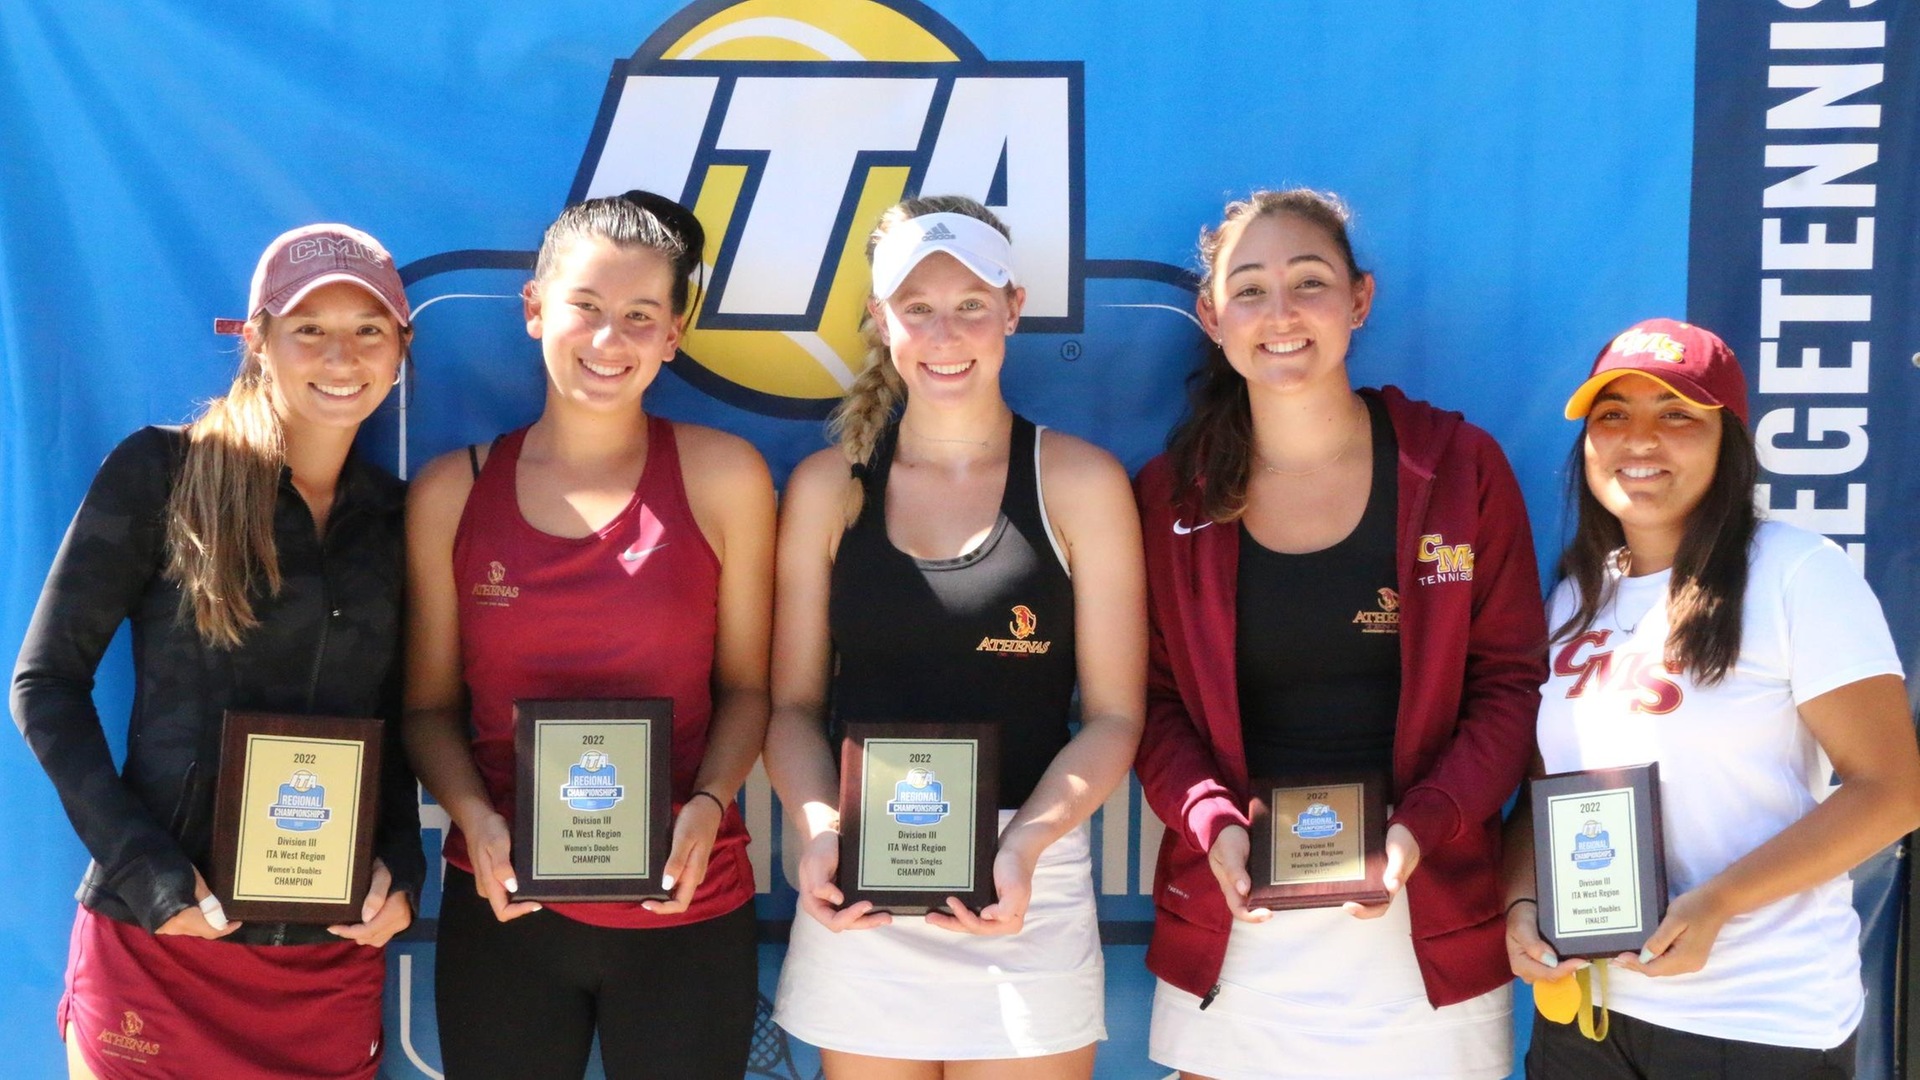 L to R: Gabby Lee, Lindsay Eisenman (doubles champions), Katherine Wurster (singles champion), Devon Wolfe, Alisha Chulani (doubles runners-up) advance to the ITA Cup